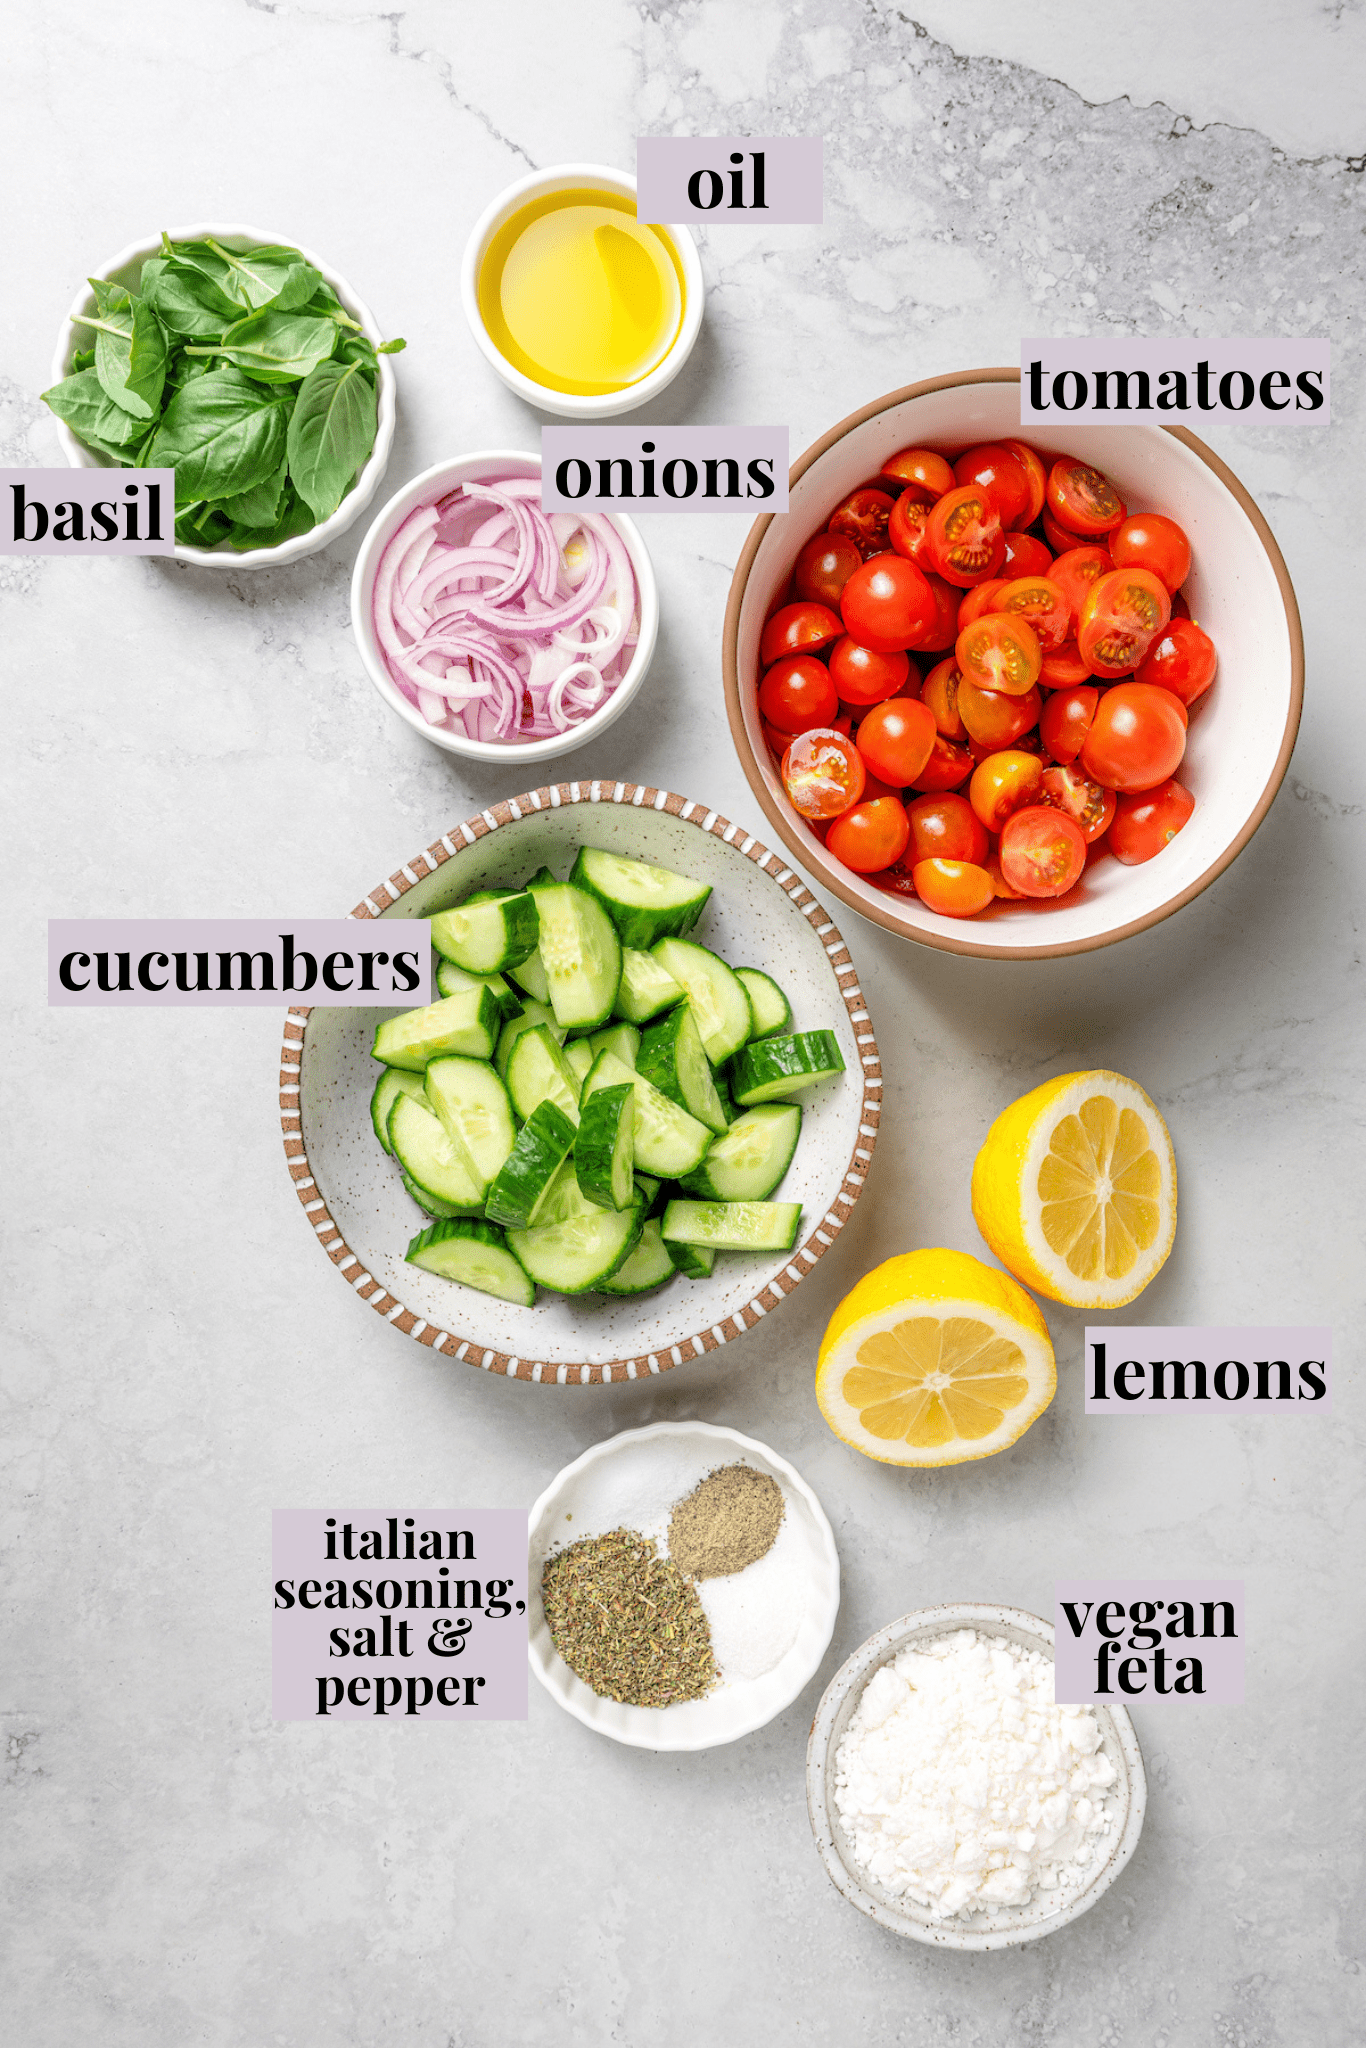 Overhead view of ingredients for cucumber and tomato salad with labels